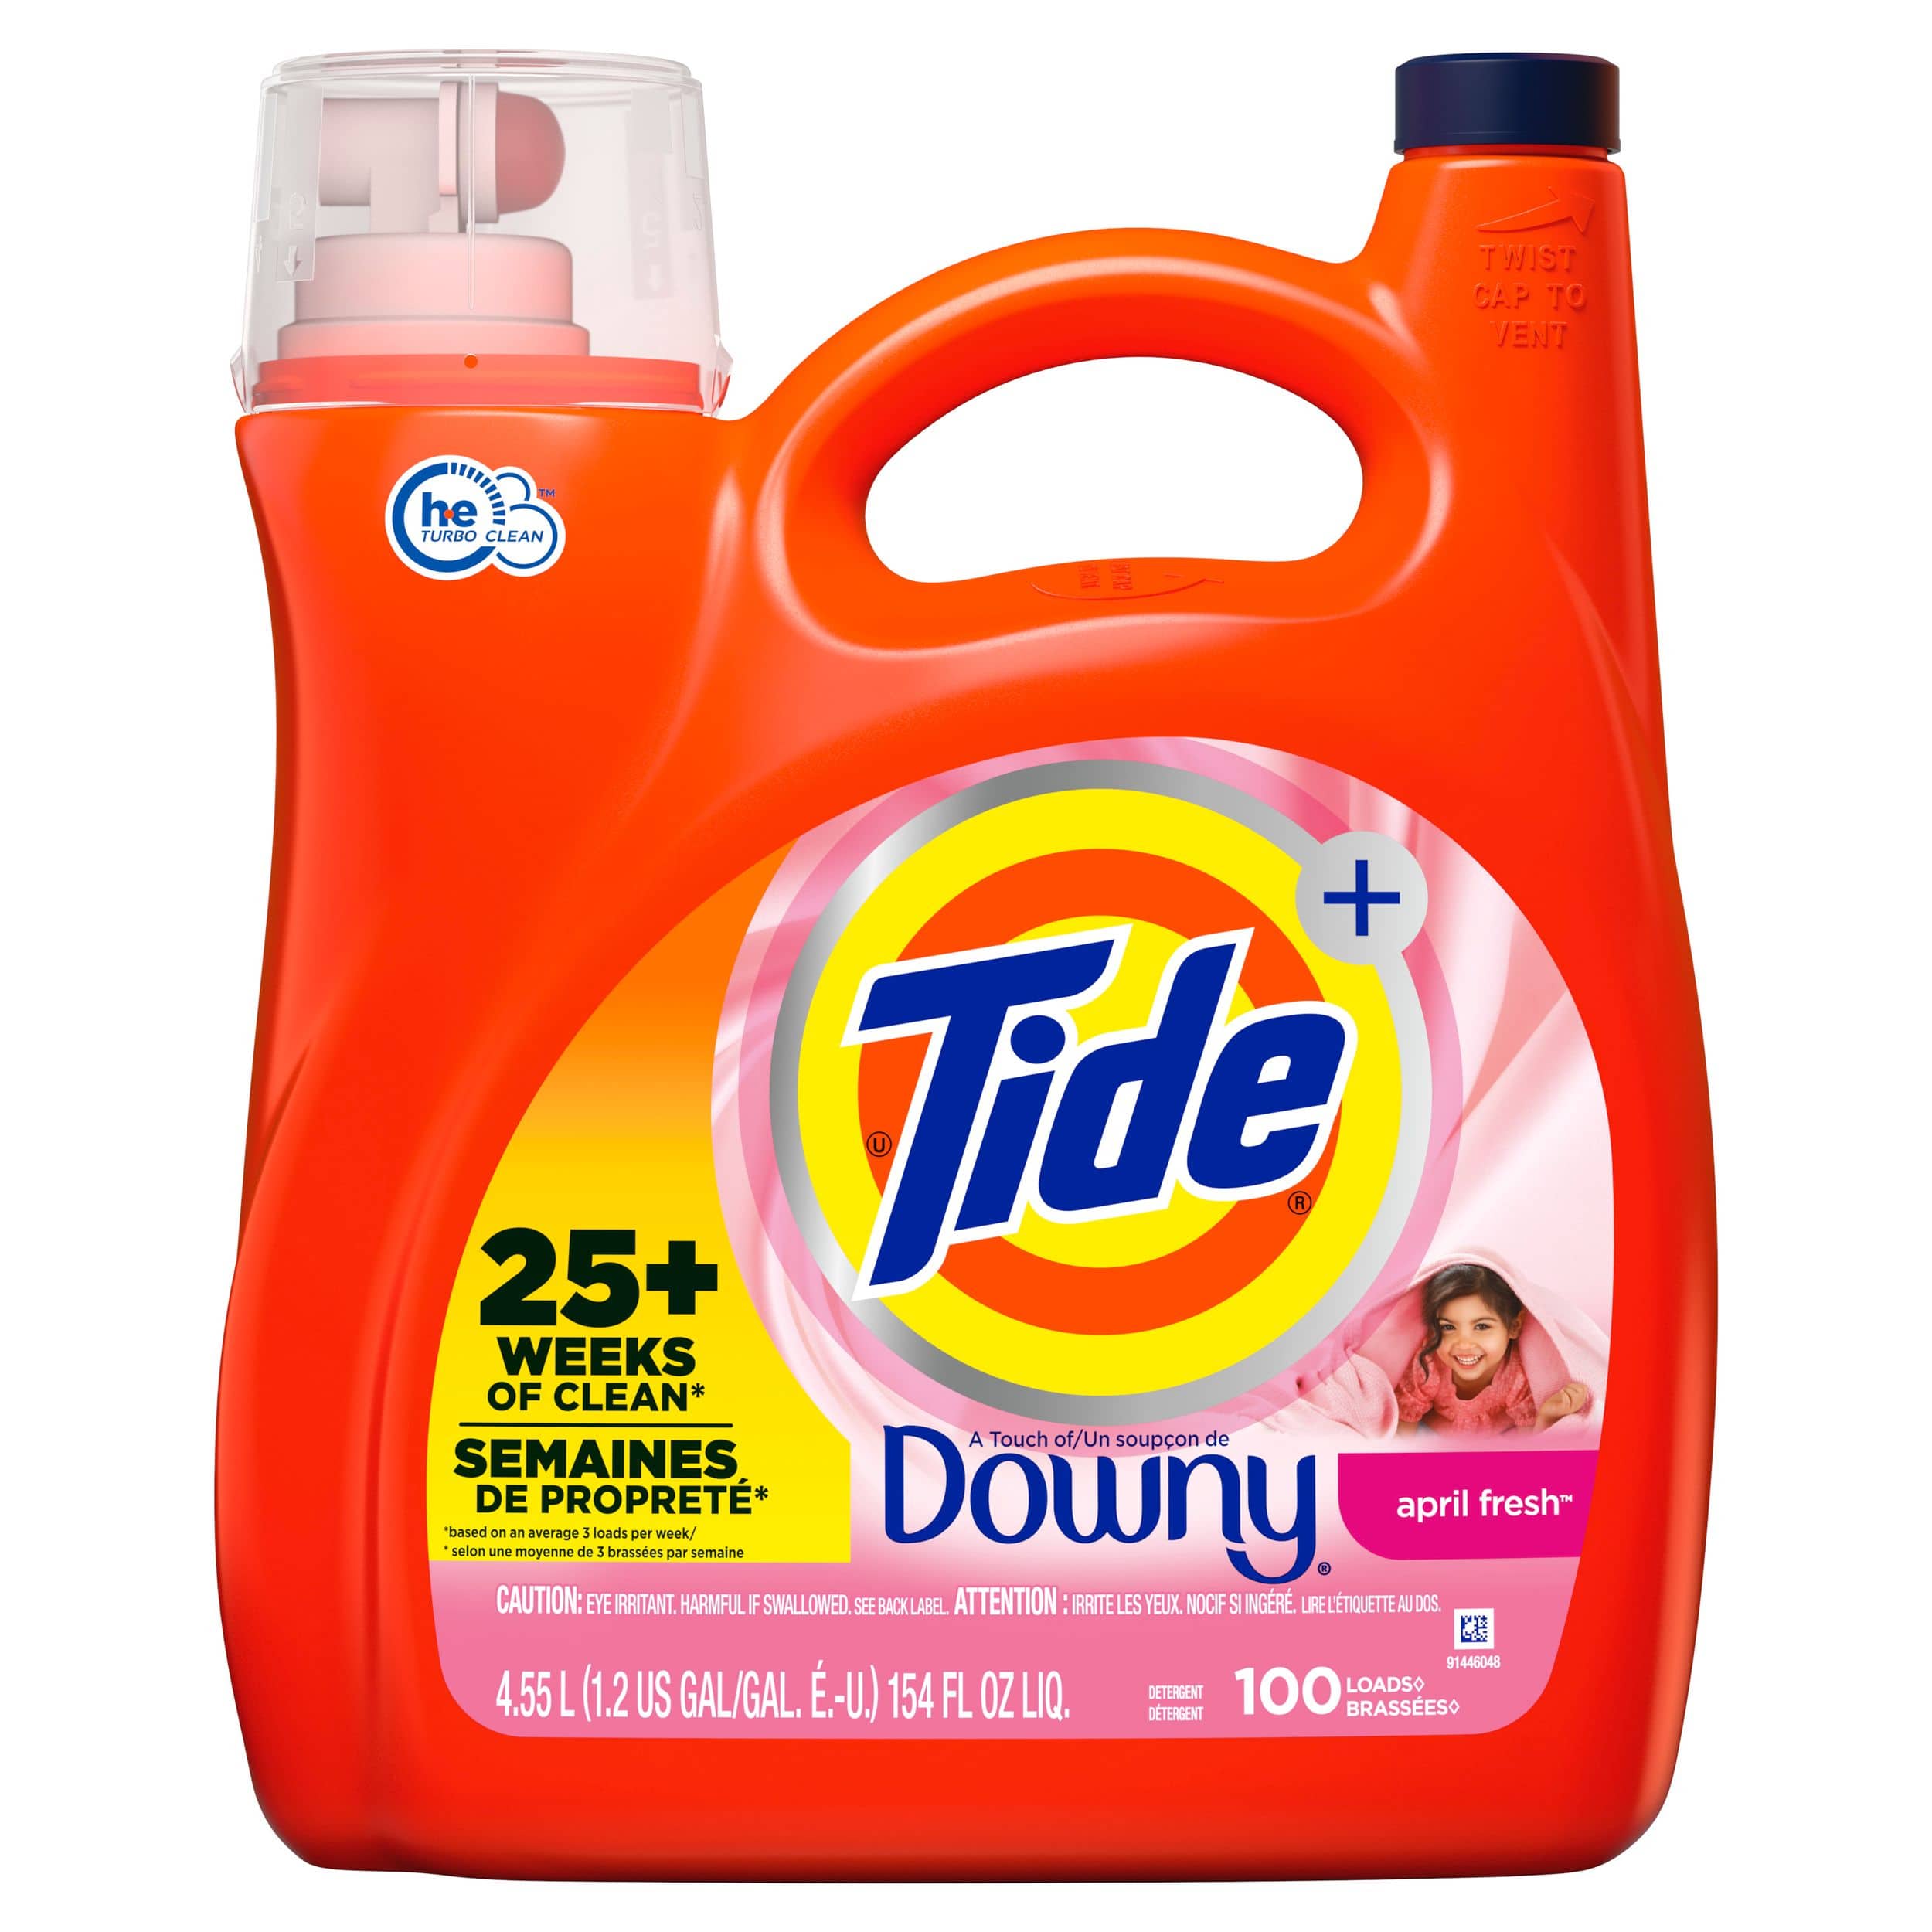 https://media-www.canadiantire.ca/product/living/home-essentials/laundry-hand-dish-cleaning-solutions/1531750/tide-liquid-he-with-touch-of-downy-april-fresh-100-load-69ab53ae-3921-48d6-9ca1-37a94662929e-jpgrendition.jpg